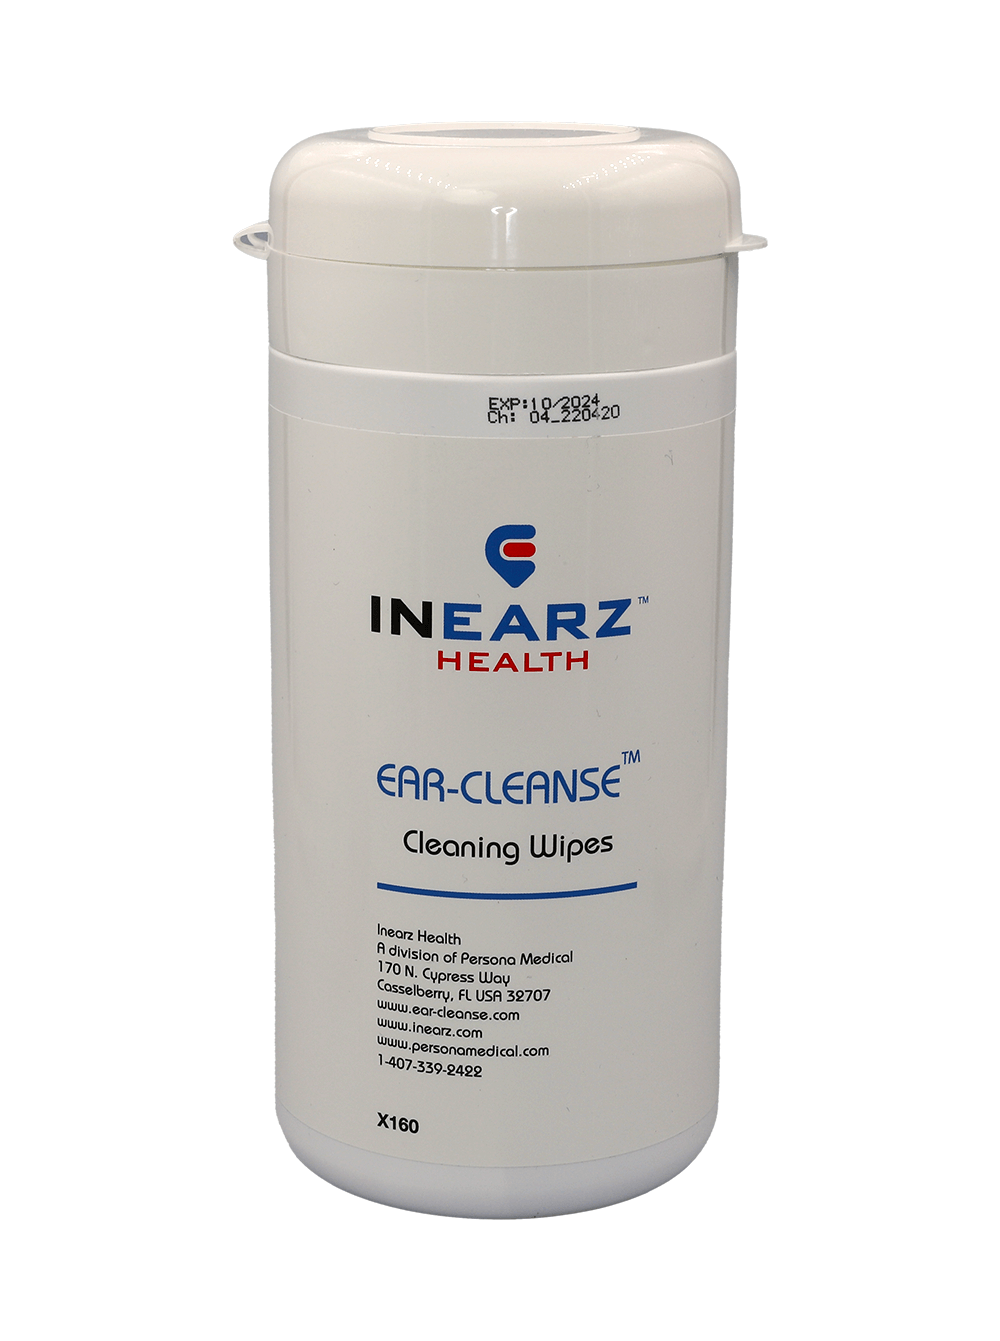 Earcleanse wipes 160 count tub